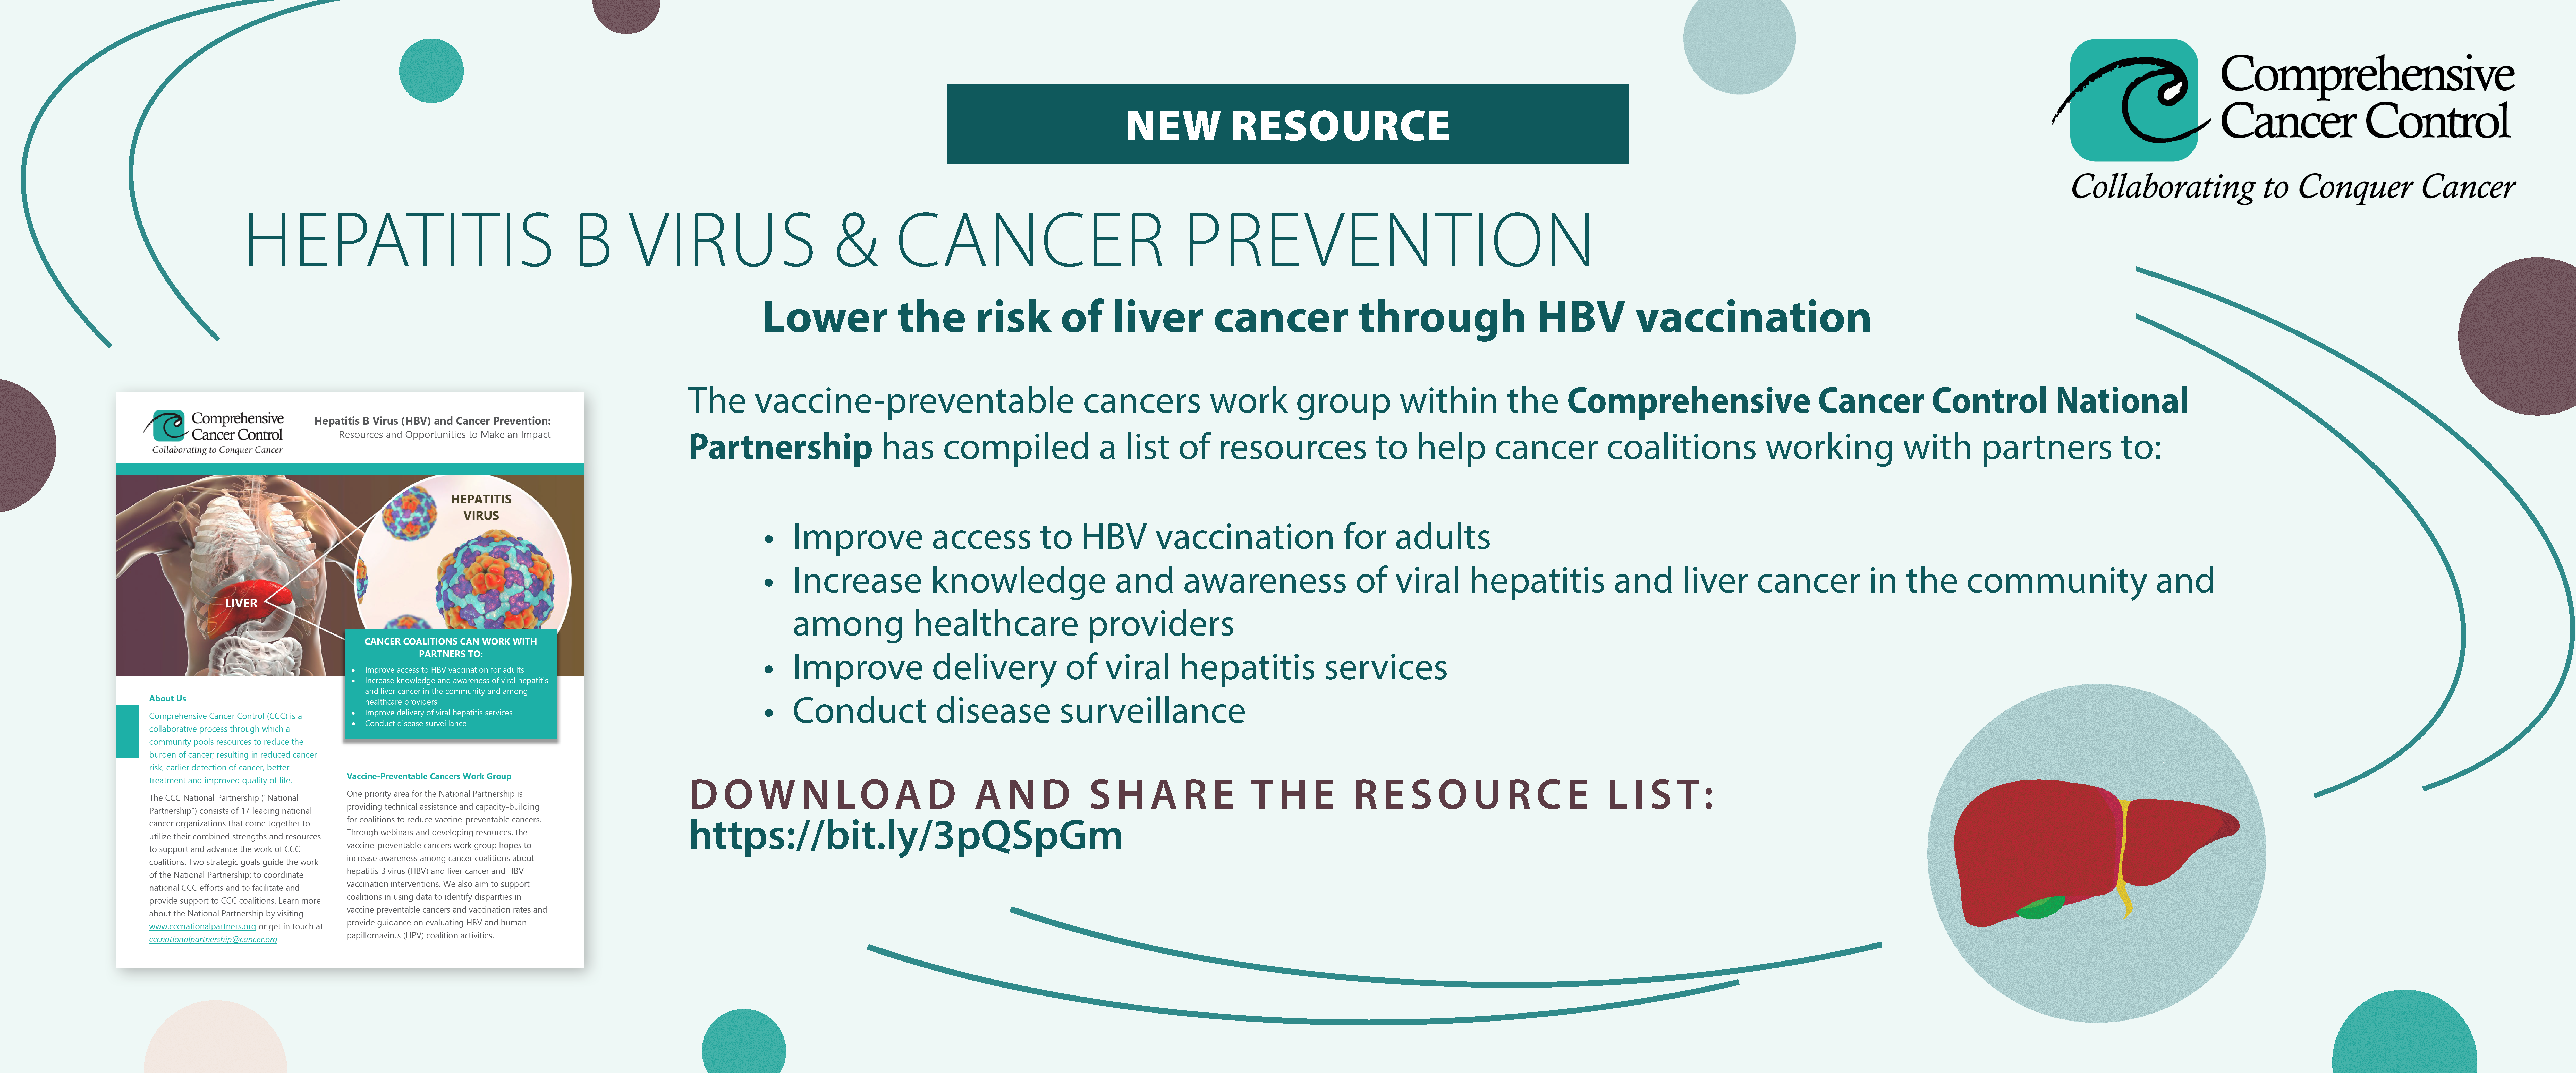 Download and share the HBV & Cancer Prevention resource list: https://bit.ly/3pQSpGm